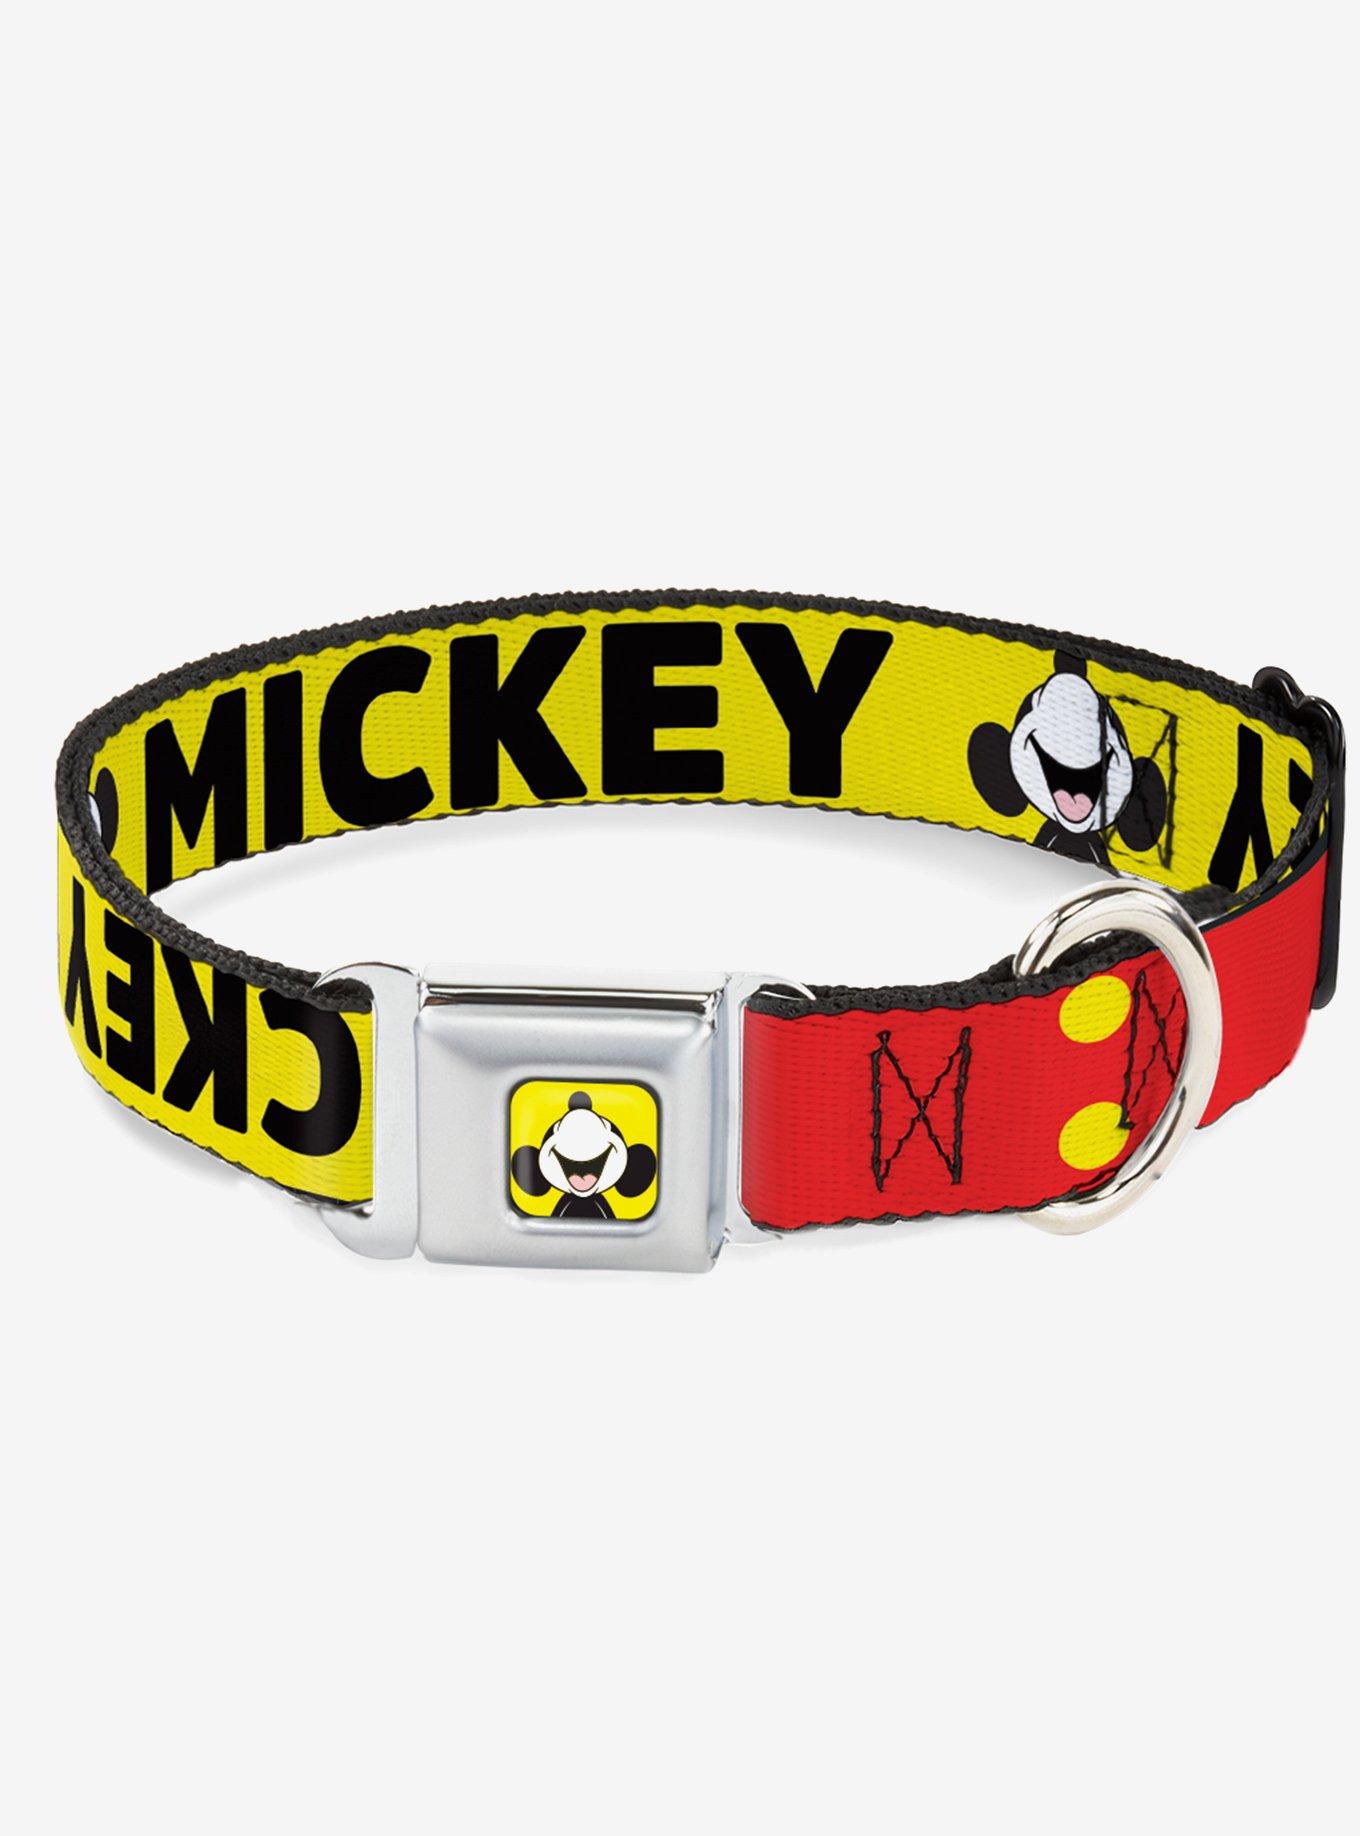 Disney Mickey Smiling Up Pose Flip Buttons Yellow Black Red Seatbelt Buckle Dog Collar, RED, hi-res